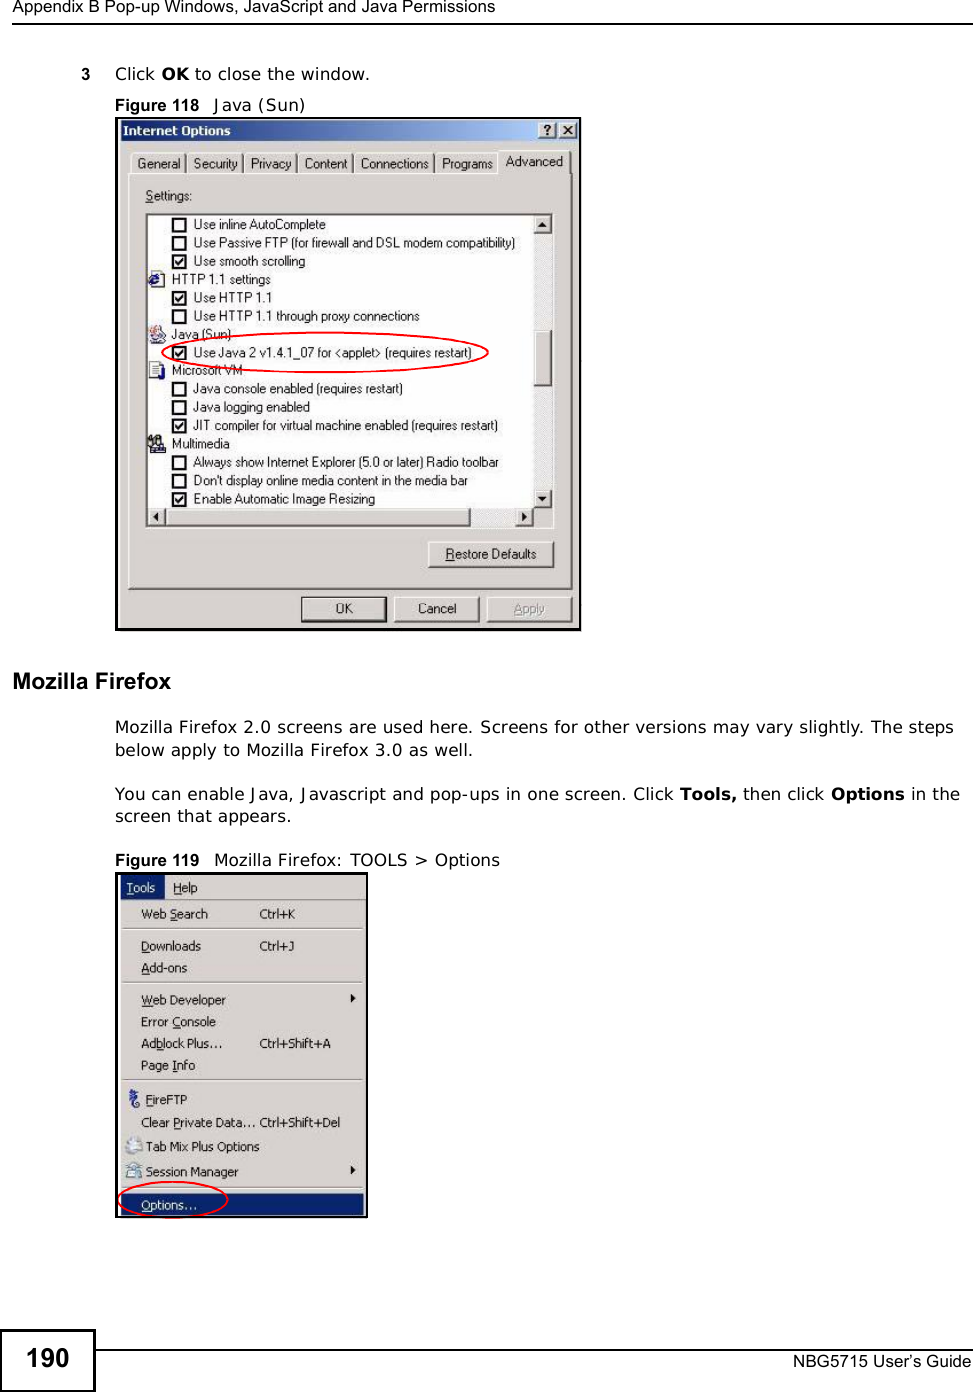 Appendix BPop-up Windows, JavaScript and Java PermissionsNBG5715 User’s Guide1903Click OK to close the window.Figure 118   Java (Sun)Mozilla FirefoxMozilla Firefox 2.0 screens are used here. Screens for other versions may vary slightly. The steps below apply to Mozilla Firefox 3.0 as well.You can enable Java, Javascript and pop-ups in one screen. Click Tools, then click Options in the screen that appears.Figure 119   Mozilla Firefox: TOOLS &gt; Options